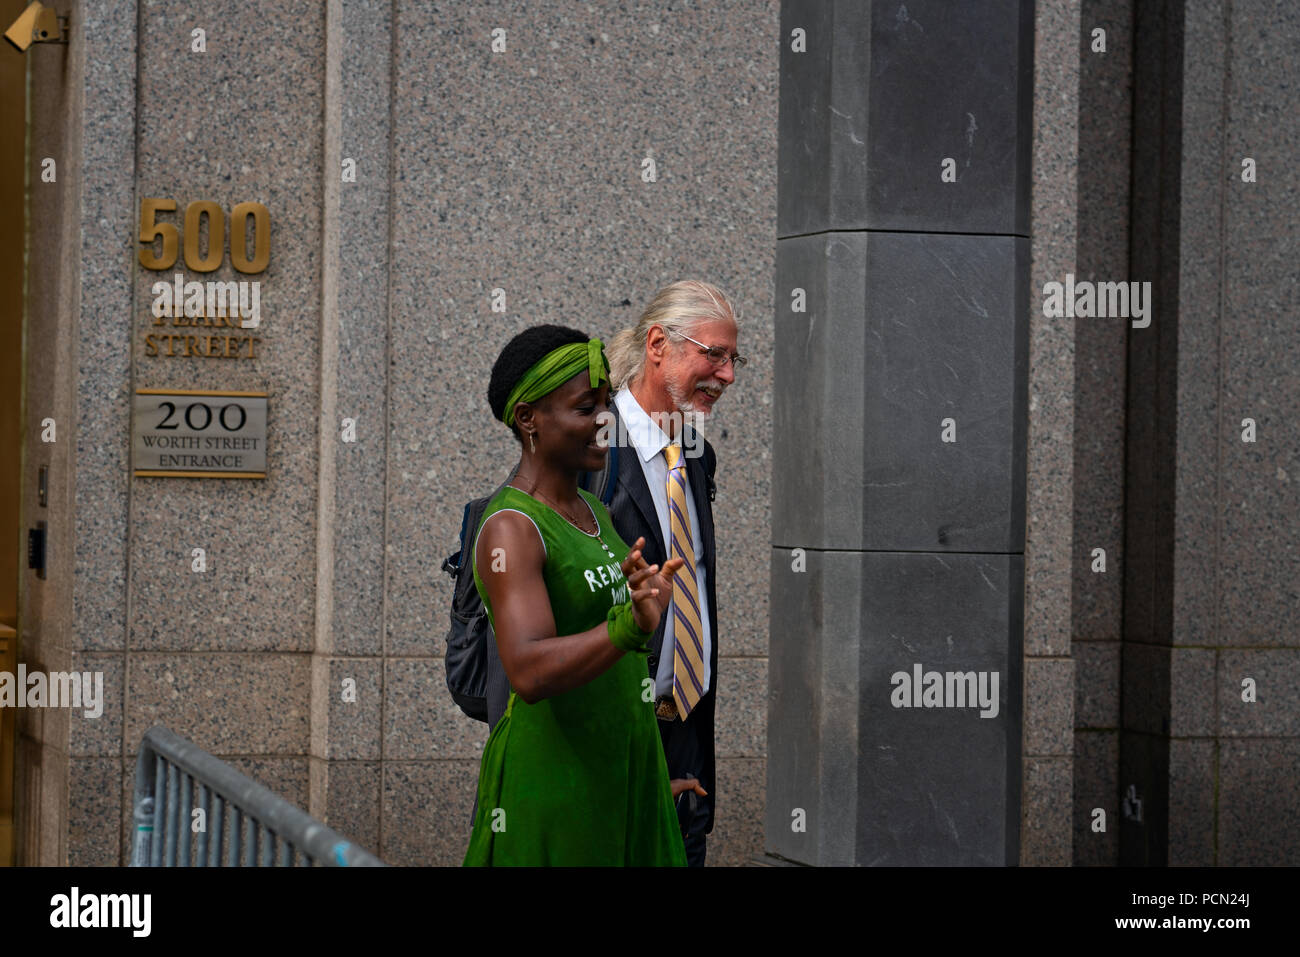 New York, New York, U.S., 3 August 2018 Immigration activist Therese Patricia Okoumou, with lawyer Ron Kuby, walks out of federal court in Manhattan after a hearing on trespassing and disorderly conduct charges.  Okoumou scaled the base of the Statue of Liberty on July 4, 2018, to protest against Trump administration immigration policies.  Okoumou wore a green dress to court bearing the words “I really care why won’t u?” – a response to first lady Melania Trump, who wore a jacket with the words “I really don’t care, do u?” when she visited a facility for migrant children in June. Stock Photo